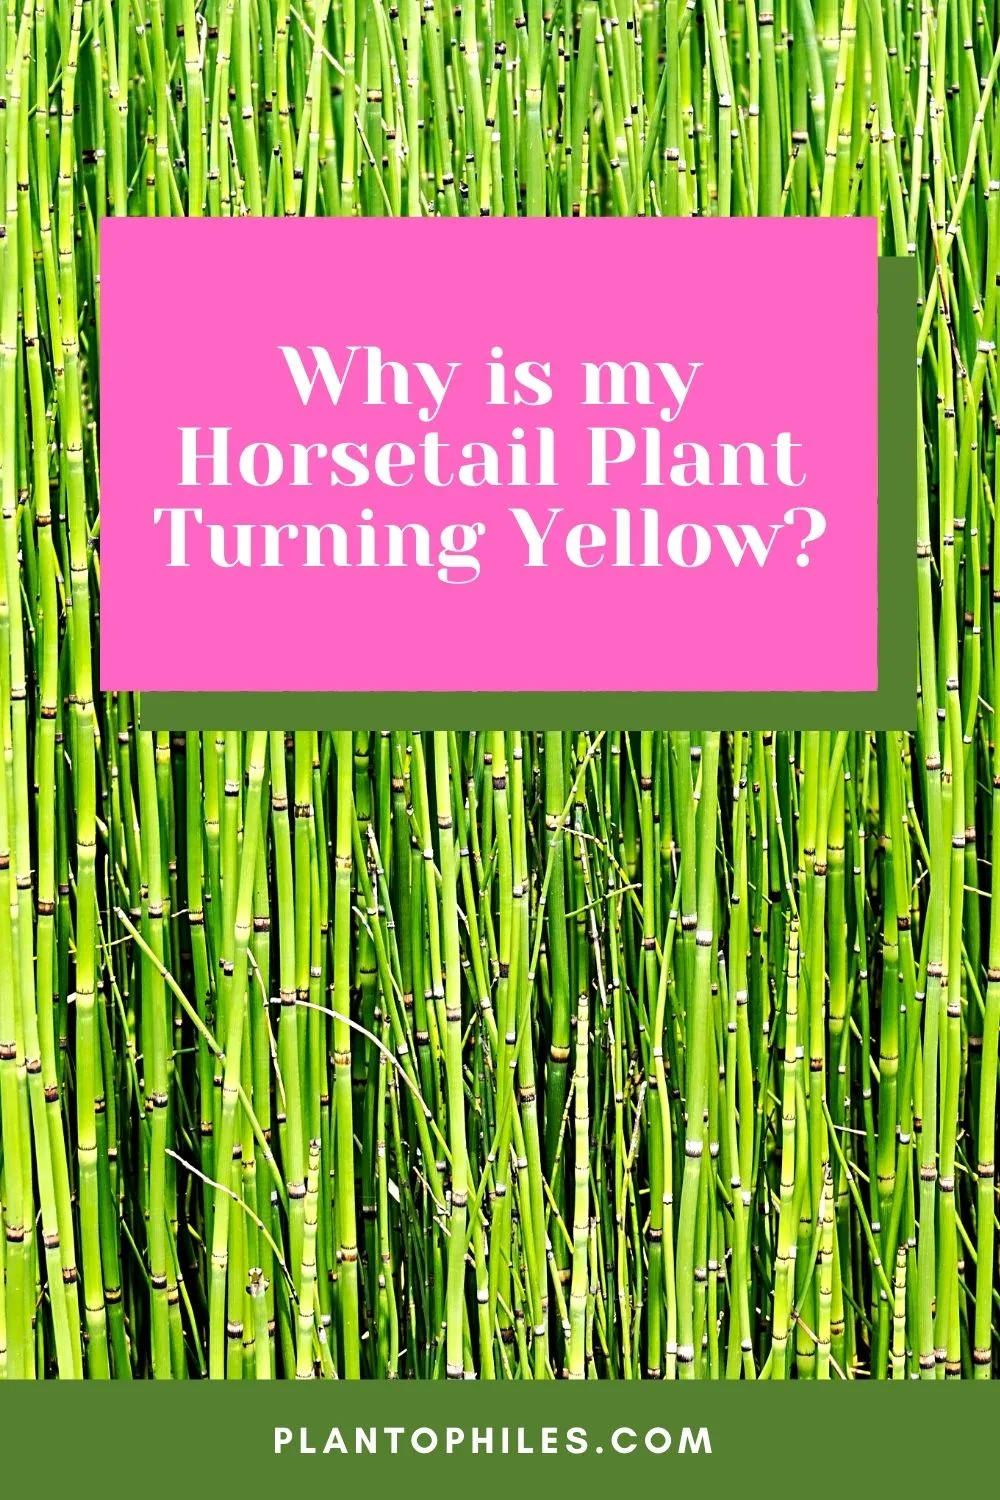 Why is My Horsetail Plant Turning Yellow?